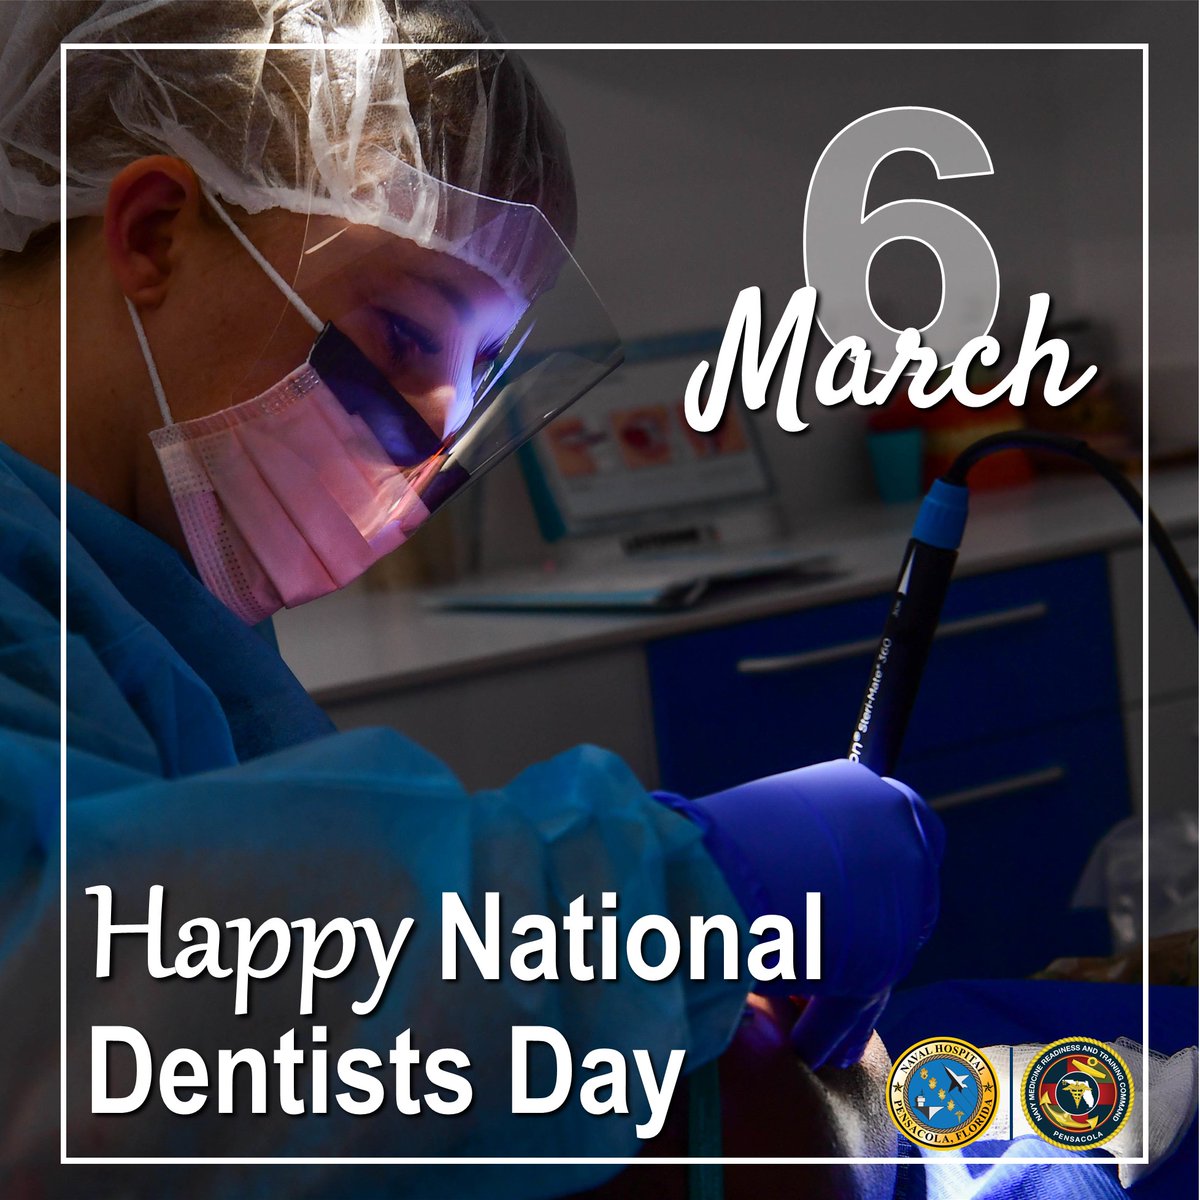 🦷 Happy National Dentist Day! 🦷

Let's celebrate the dental professionals who keep our smiles healthy and bright! Thank you, dentists, for your dedication and care. :) 😁 #NationalDentistDay #SmileBright #OralHealth #ThankYouDentists 🦷✨